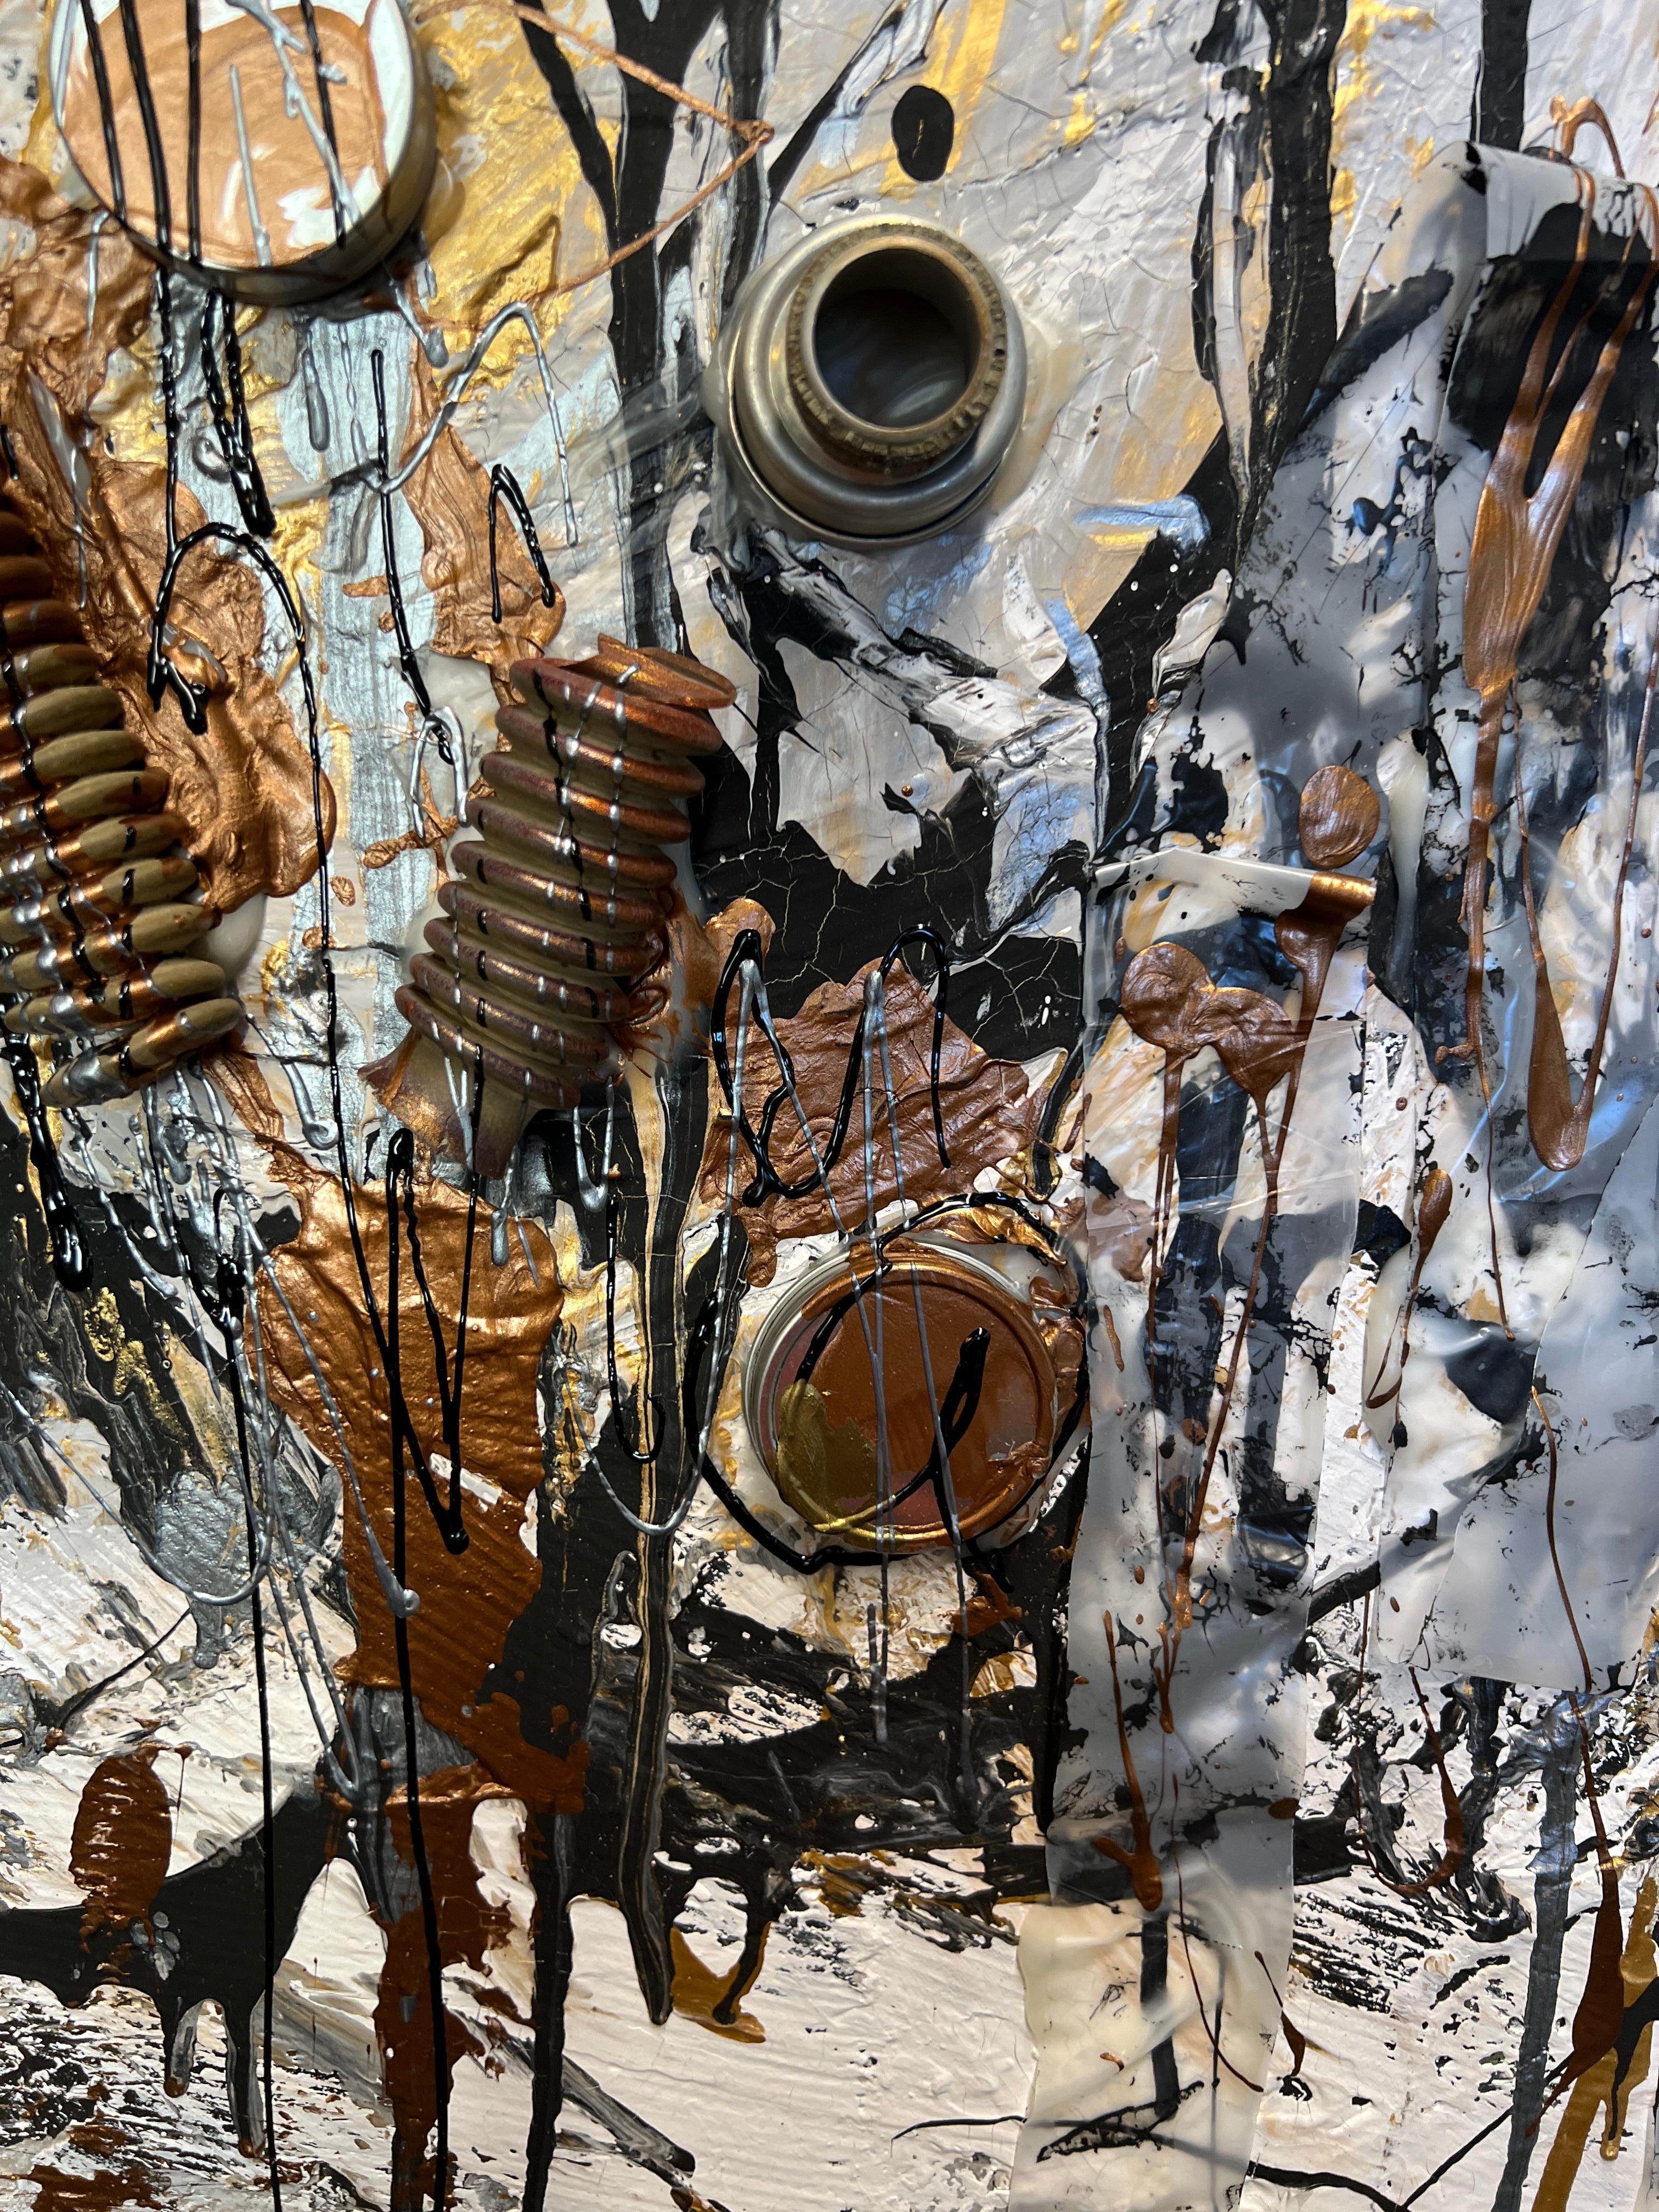 After 77 Years, Again in Fear? - Mixed Media Assemblage on Canvas - Gold Abstract Sculpture by Irena Orlov